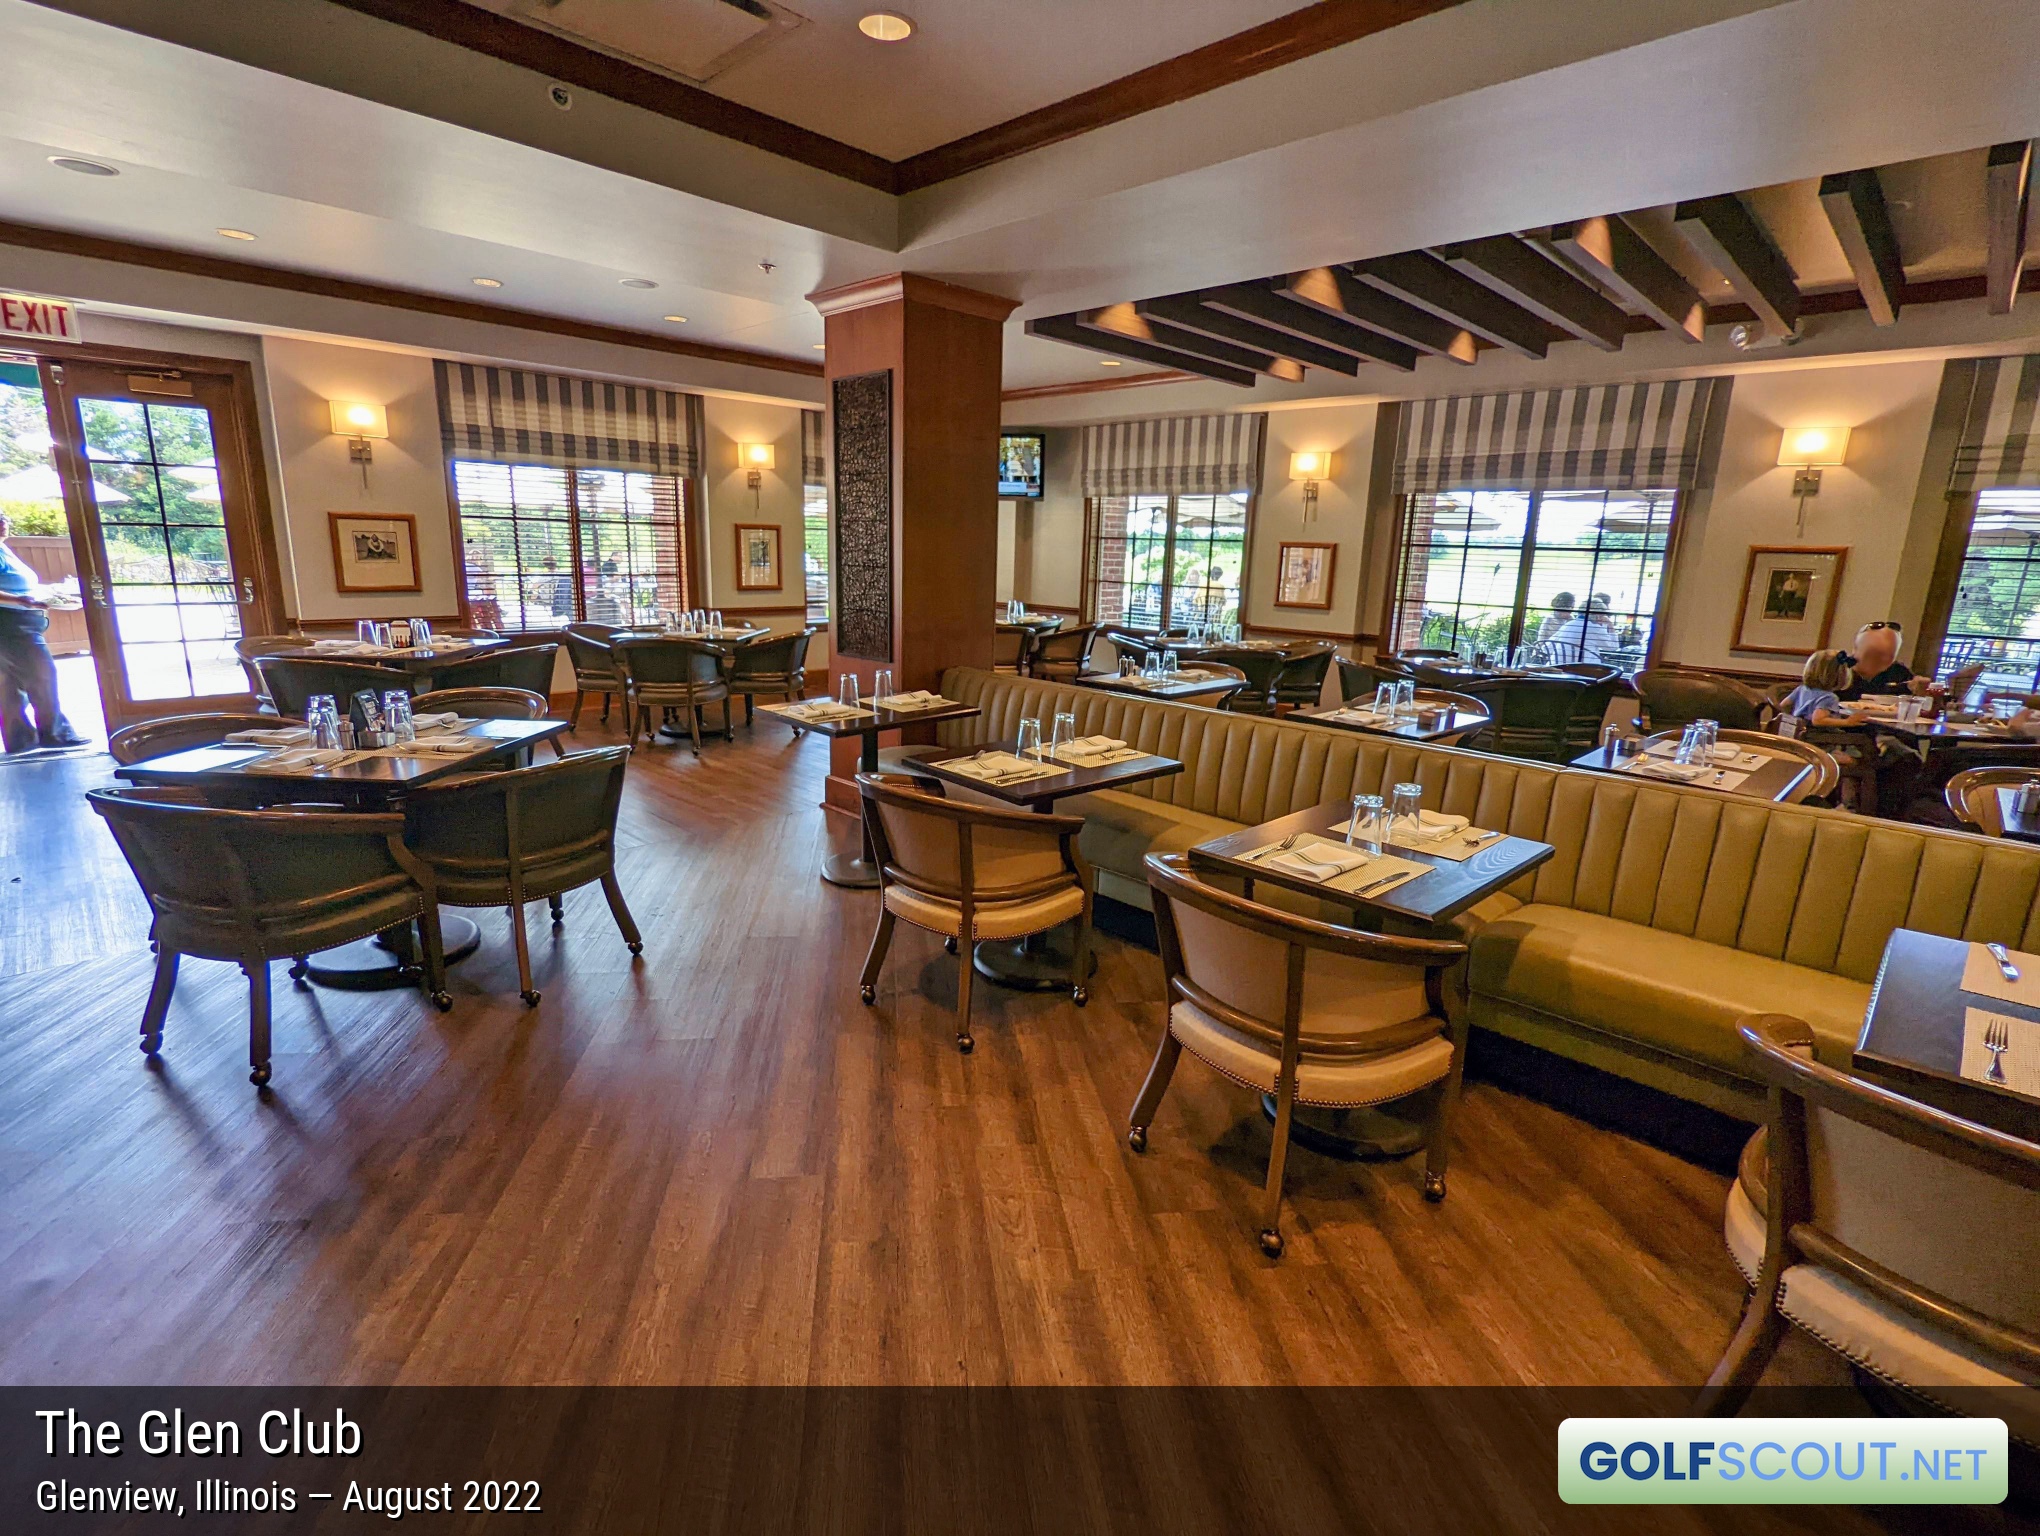 Photo of the restaurant at The Glen Club in Glenview, Illinois. 